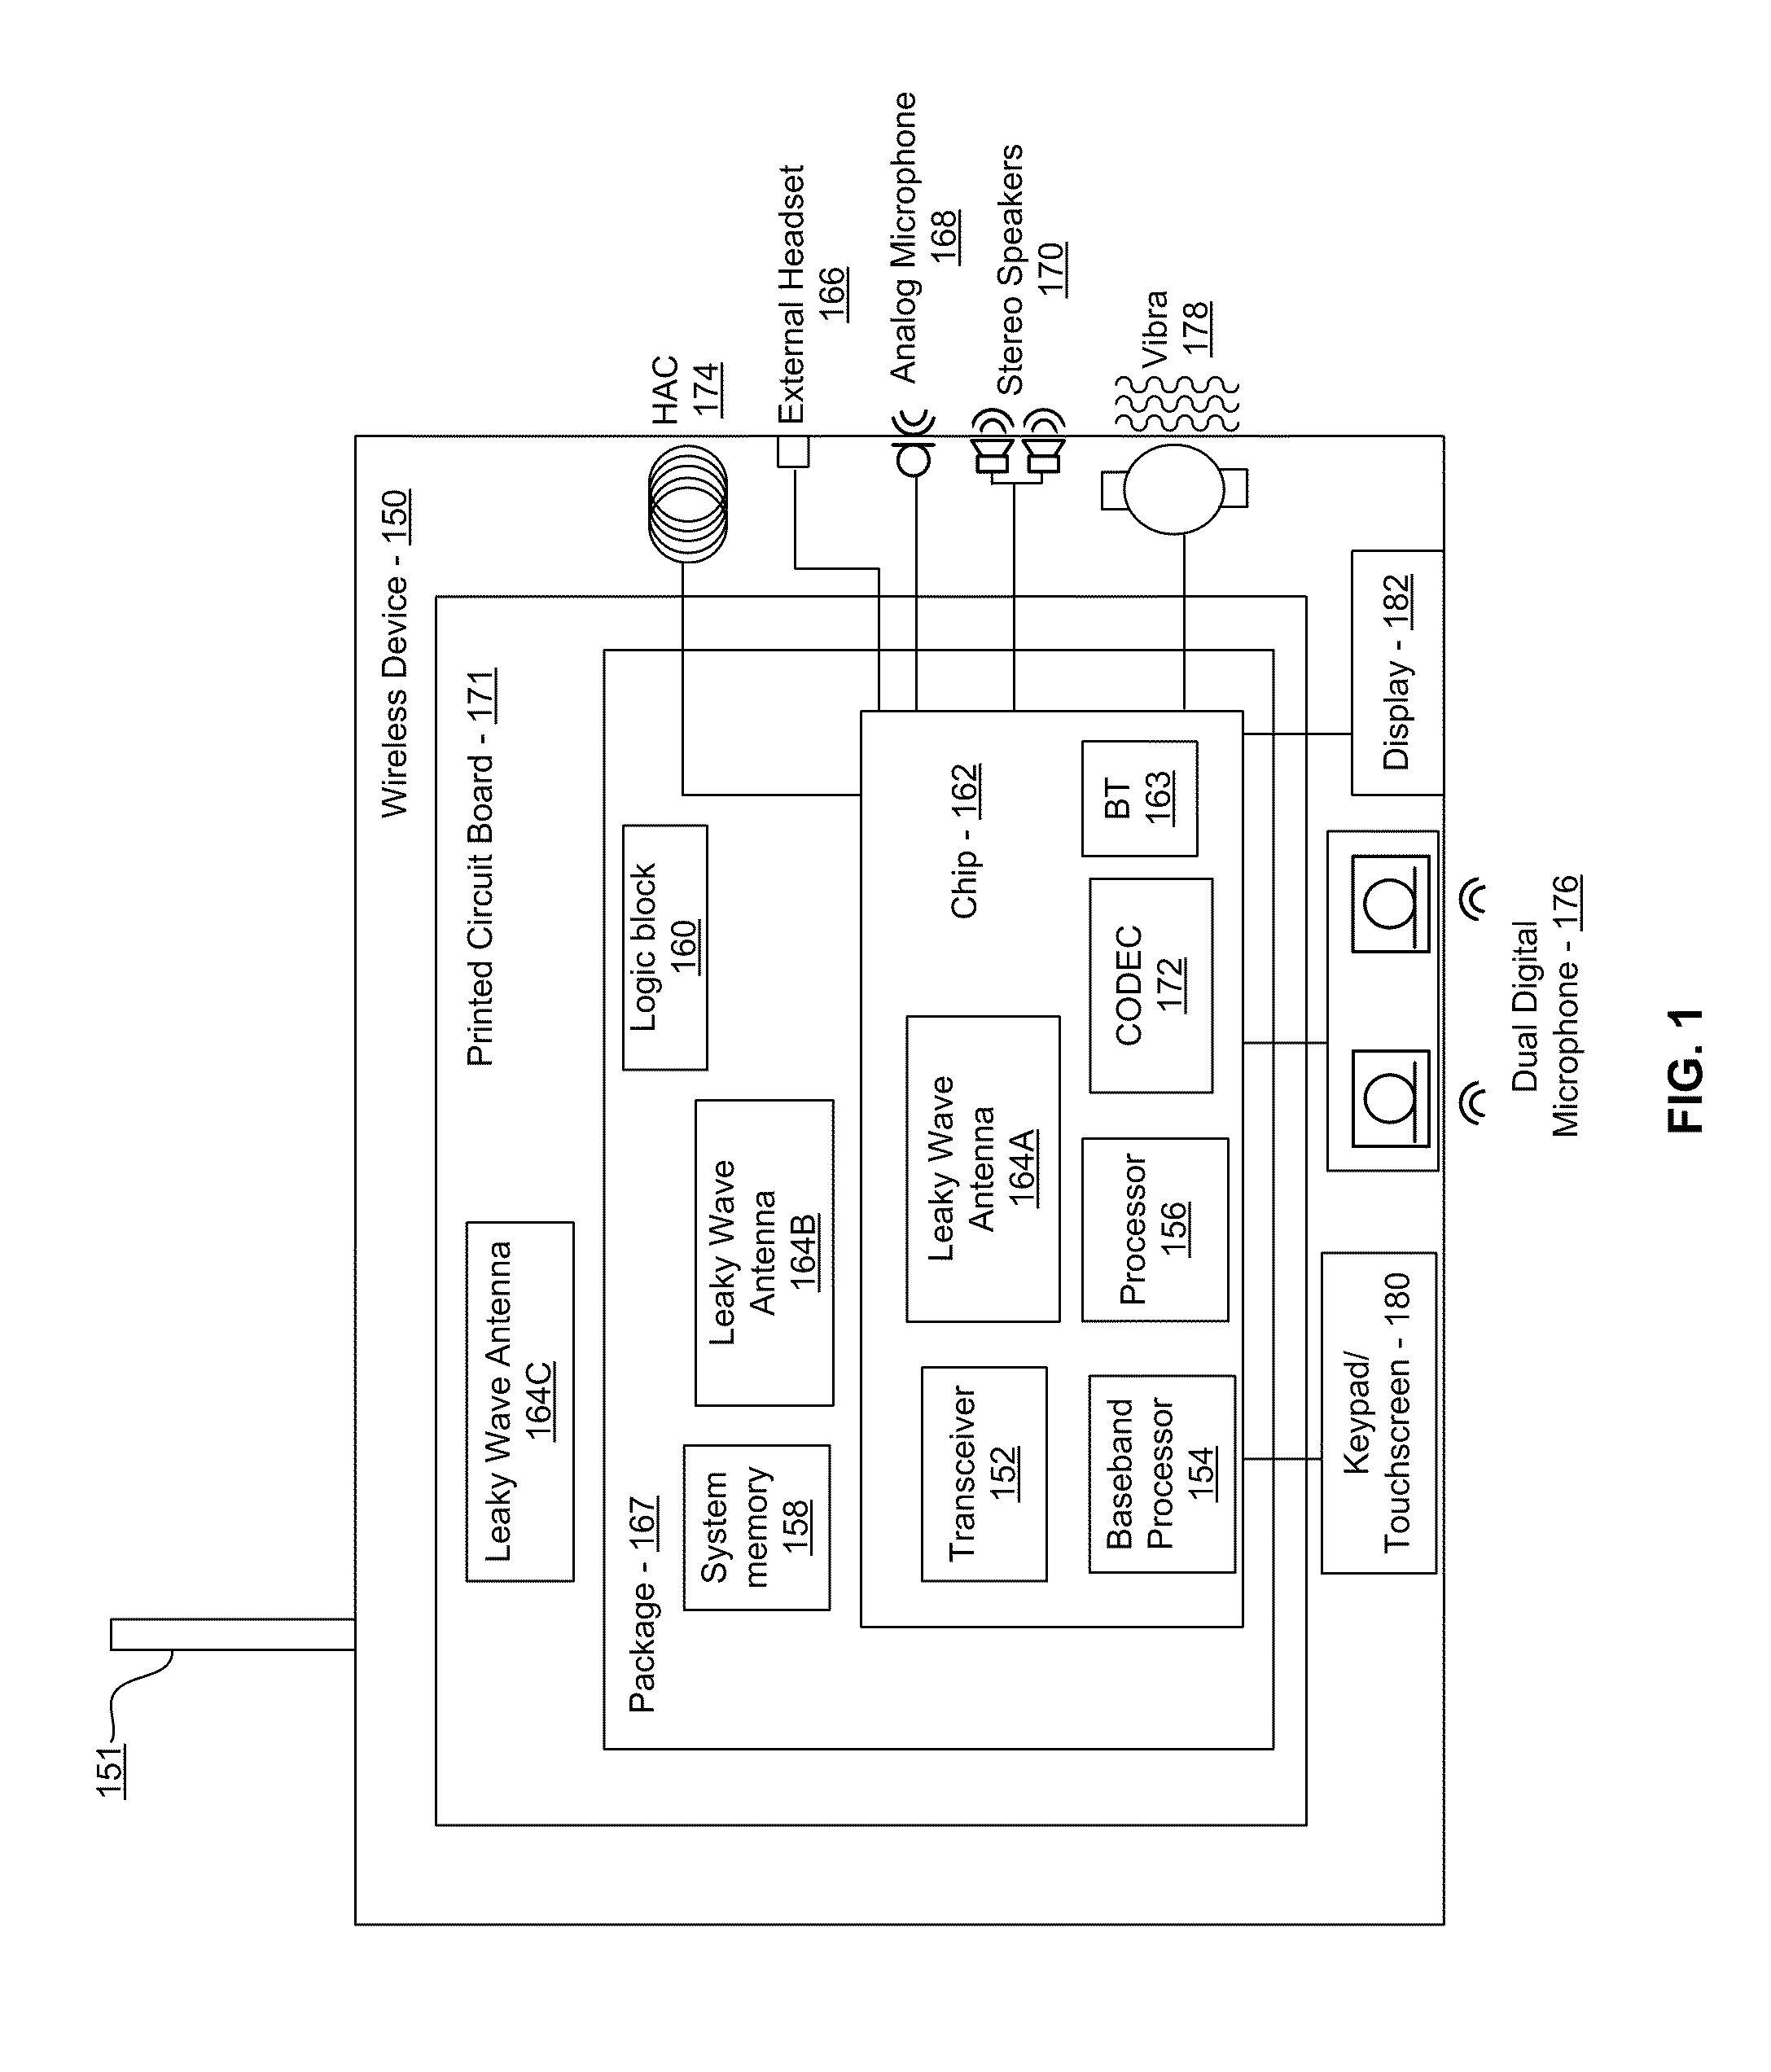 Method and System for a Leaky Wave Antenna as a Load on a Power Amplifier